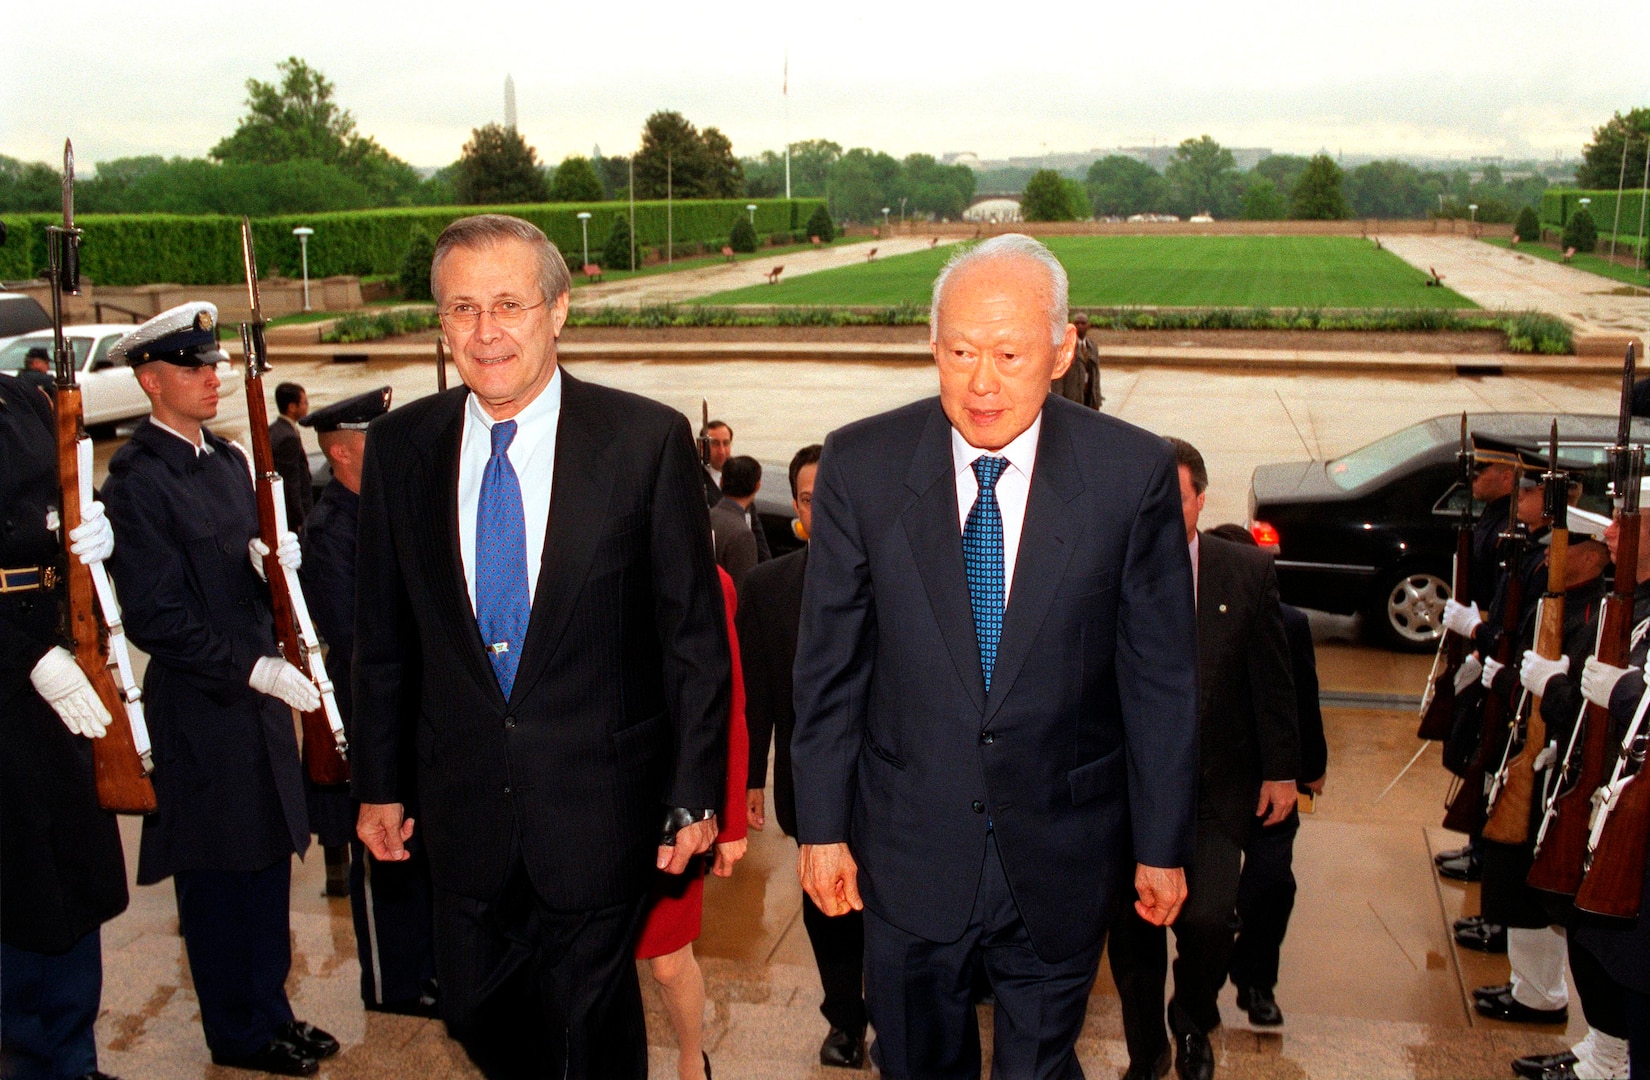 Secretary of Defense Donald H. Rumsfeld (left) escorts Senior Minister Lee Kuan Yew, of Singapore, through an honor cordon and into the Pentagon on May 2, 2002. Rumsfeld and Lee met to discuss bilateral security issues including the war on terrorism.   DoD photo by R. D. Ward.